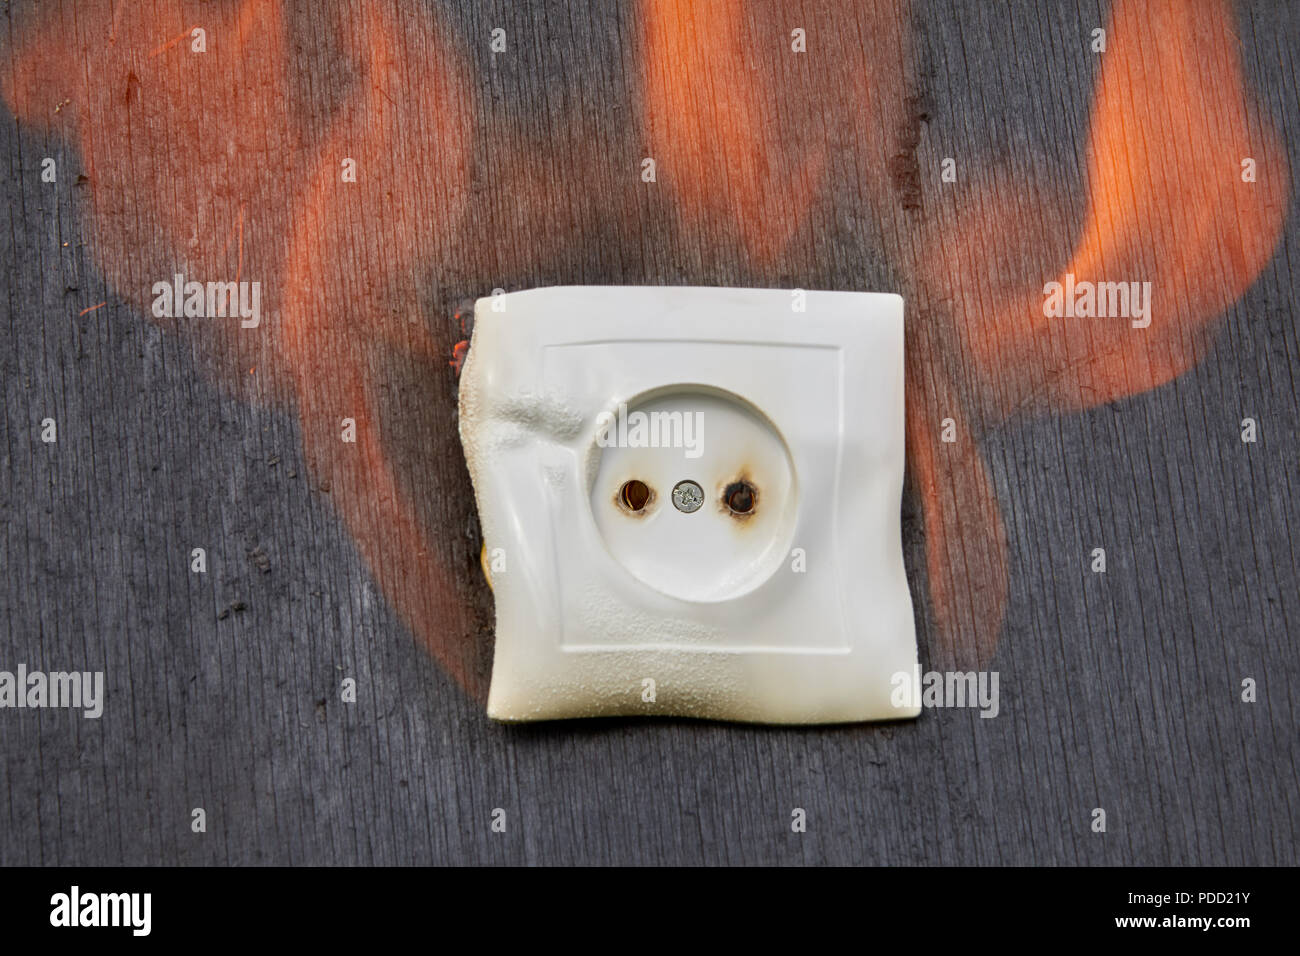 Defective wiring, fire plastic wall power socket. Stock Photo